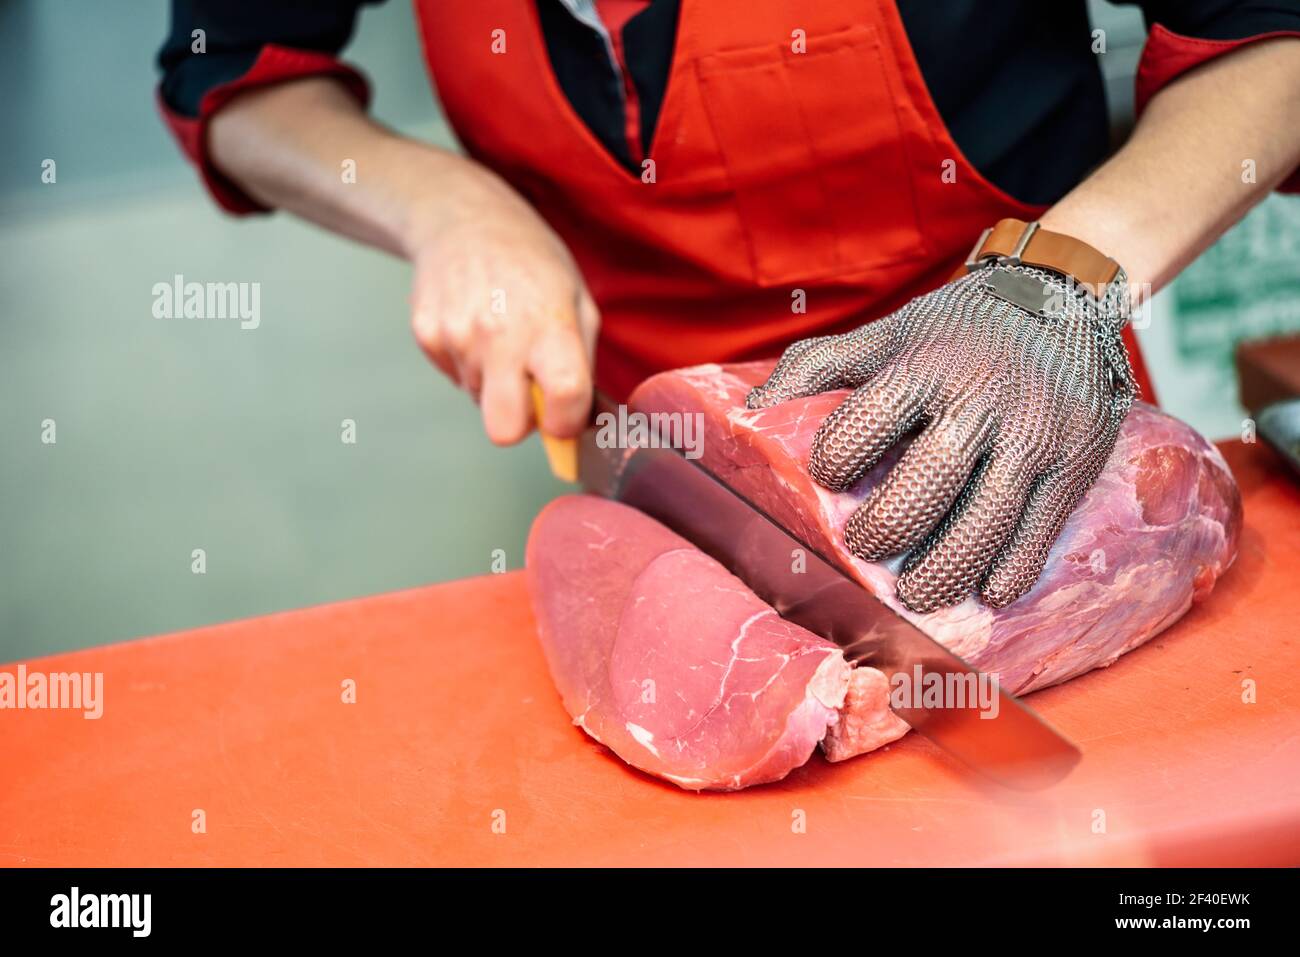 Female butcher cutting fresh meat in a butcher shop with metal safety mesh glove Stock Photo